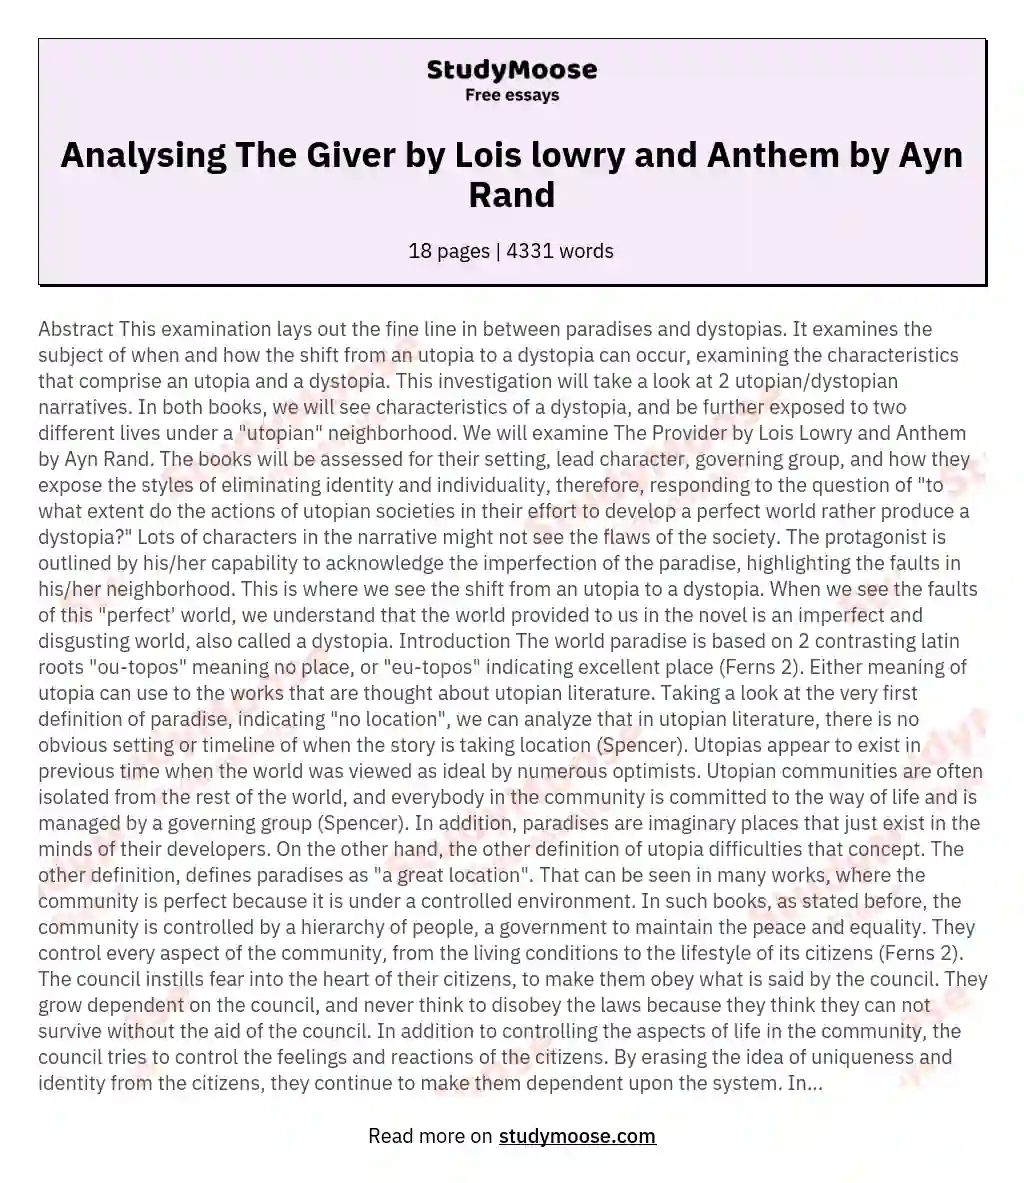 Analysing The Giver by Lois lowry and Anthem by Ayn Rand